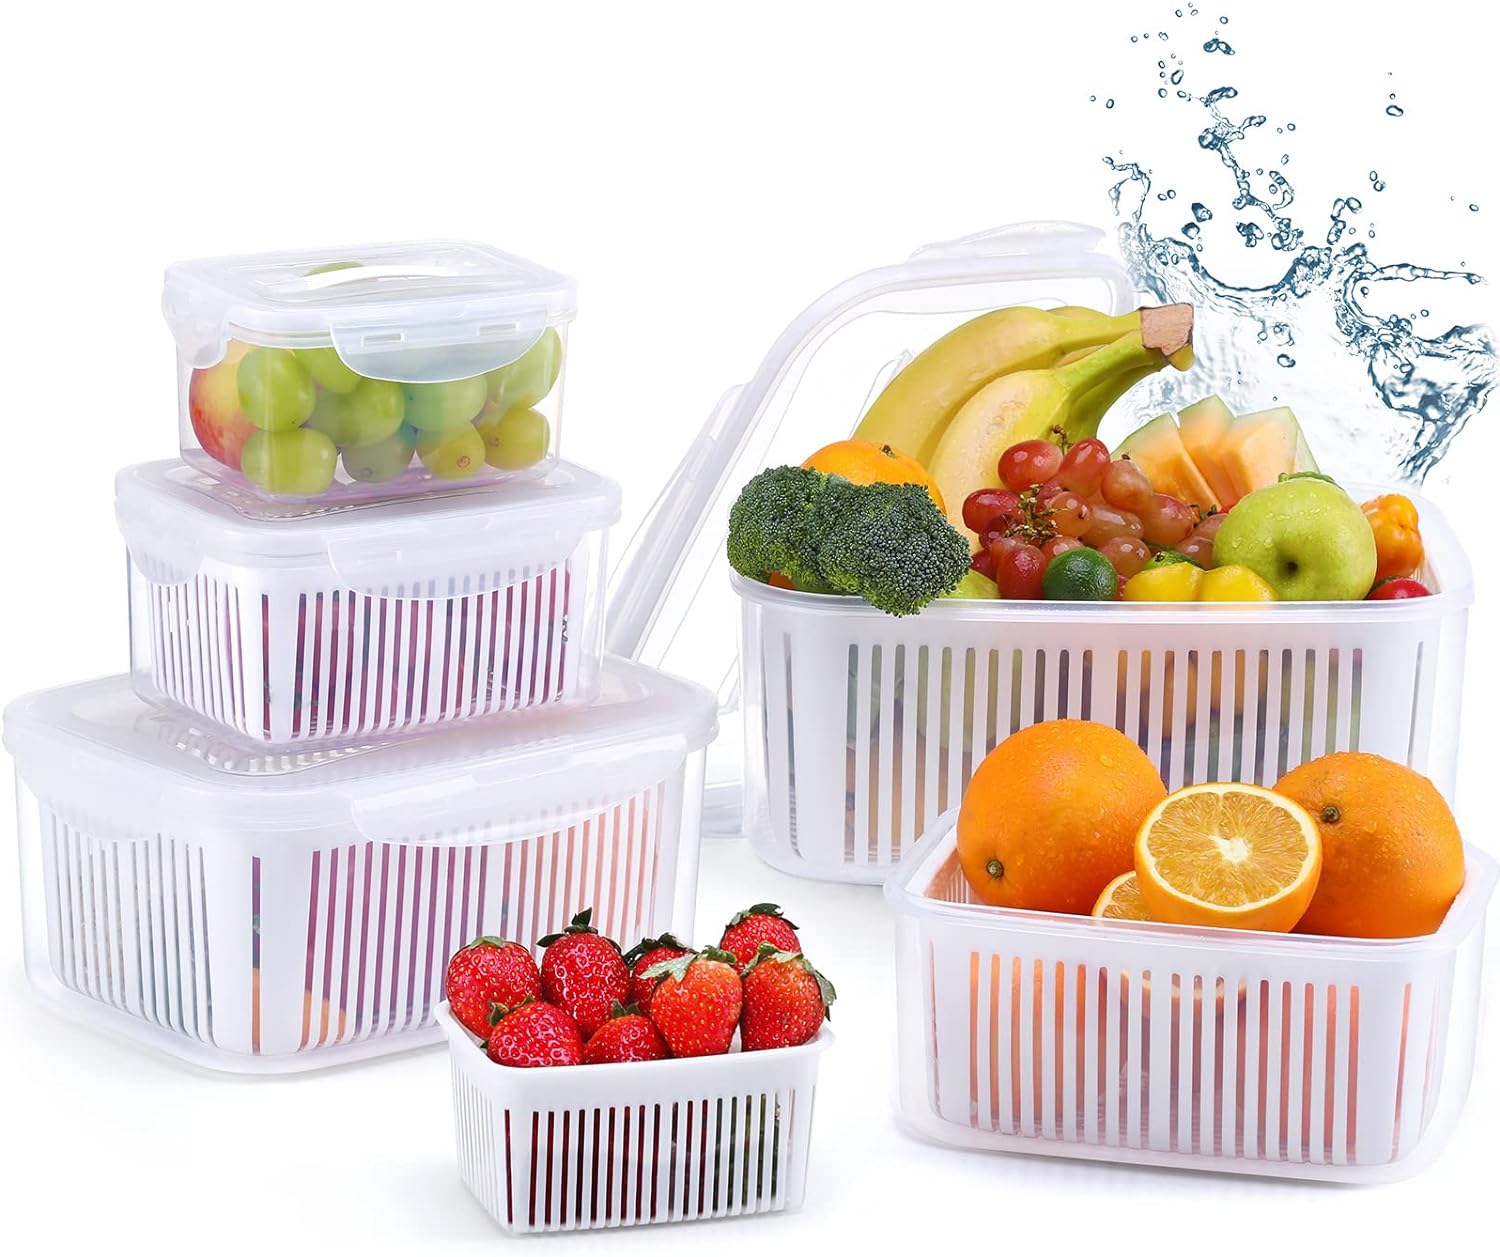 LUXEAR Fruit Vegetable Produce Storage Saver Containers with Lid & Colander 5 Packs BPA-Free Plastic Fresh Keeper Set | Refrigerator Fridge Organizer | for Salad Berry Lettuce Food Meat Fish Celery